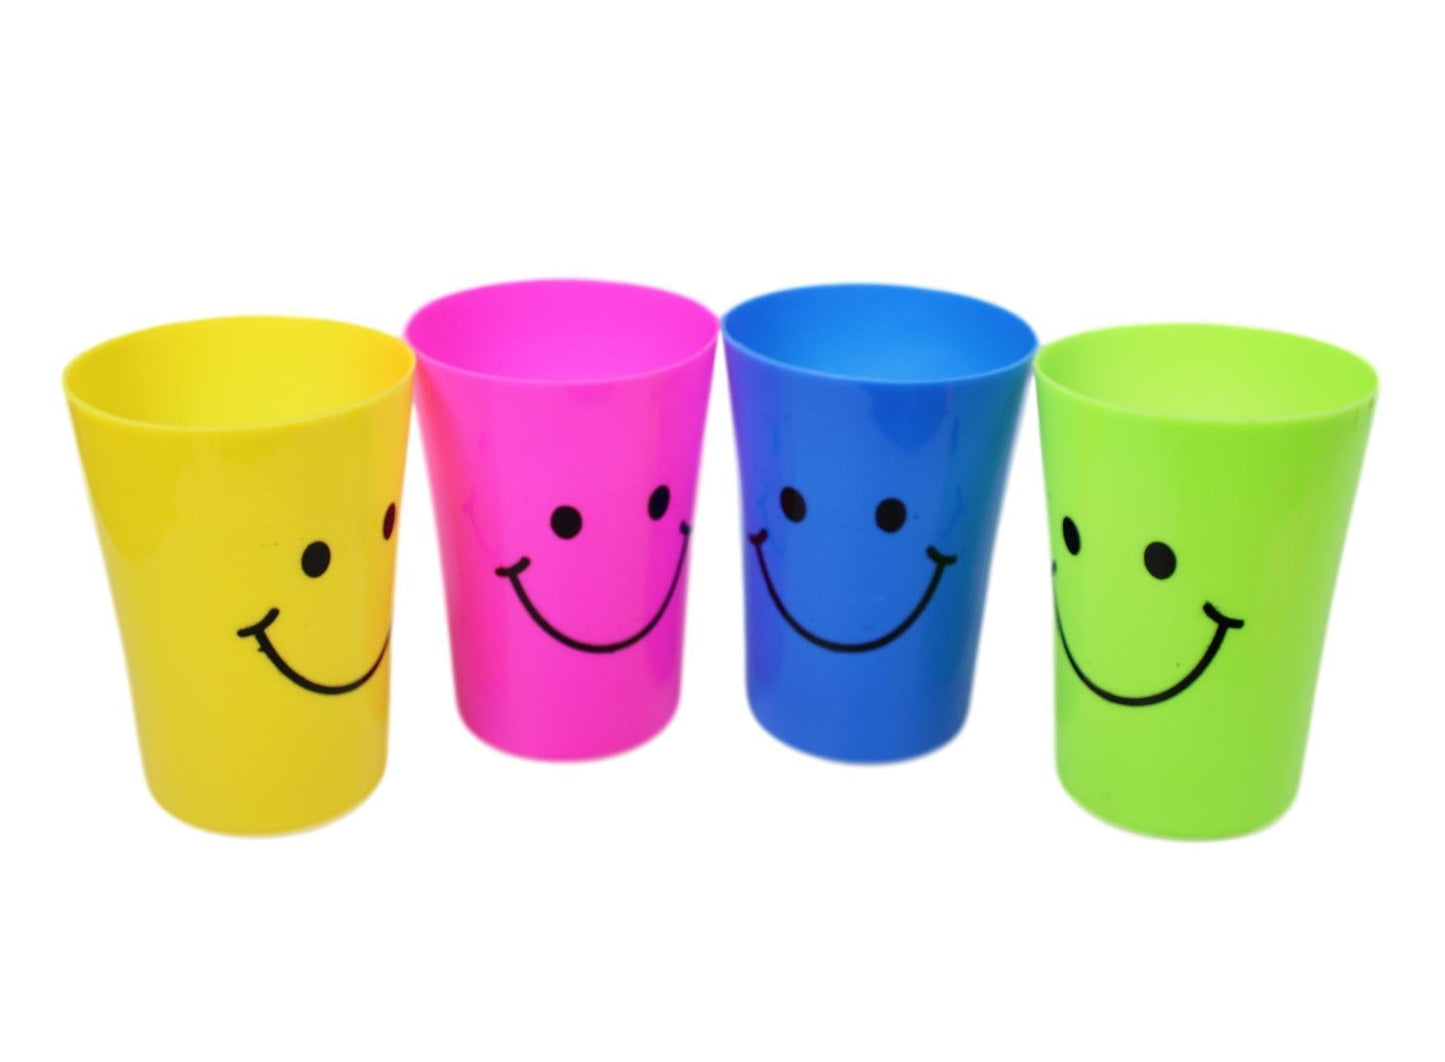 Children's Plastic Smiley Face Party Glasses Cups Pack of 4 0439 (Parcel Rate)